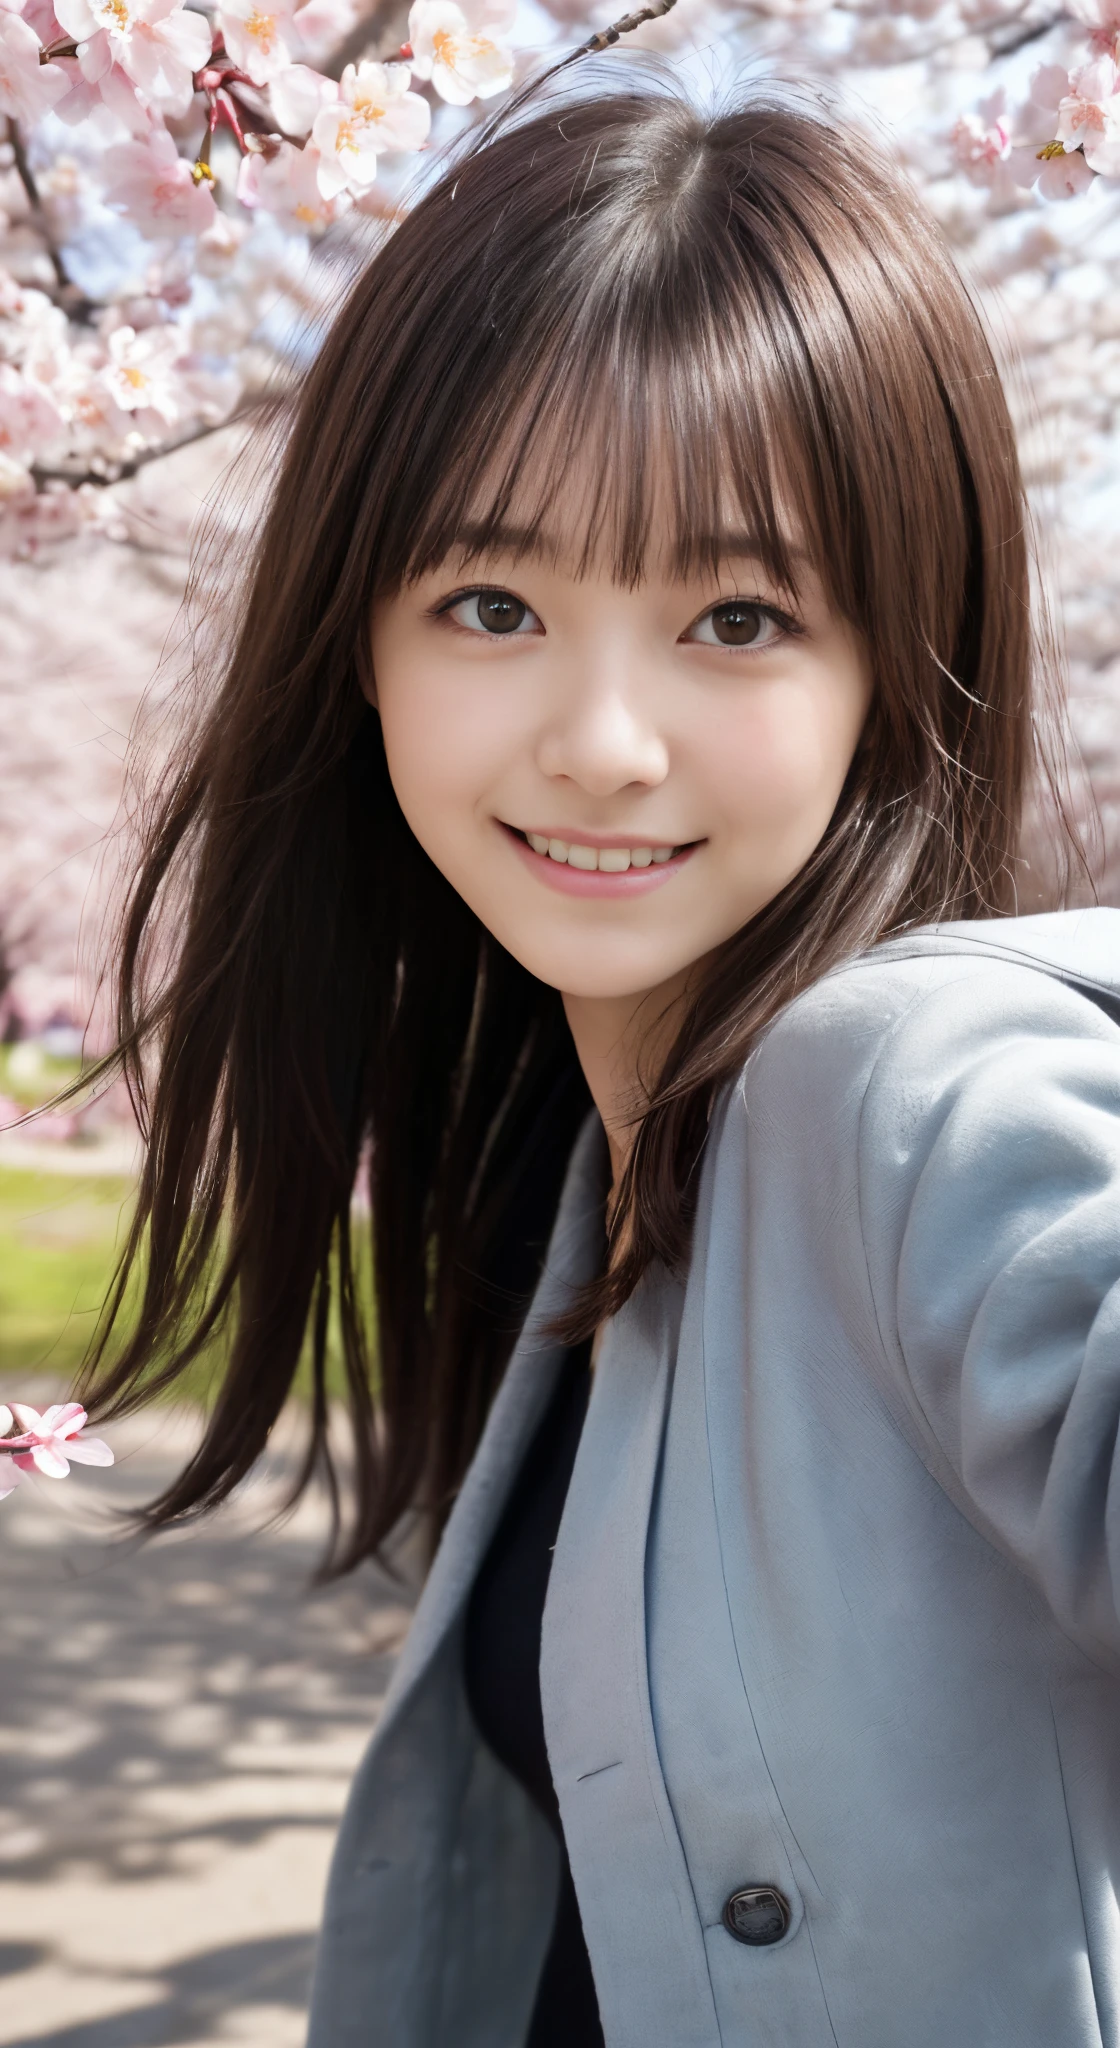 (slender small breasts and long hair,,,,,,,,,、Close up portrait of one girl with dull bangs in spring coat and shirt :1.5)、(Low angle shot of a girl dancing happily、the hair flutters with the wind :1.5)、(Rows of cherry blossom trees in full bloom and cherry blossom petals dancing in the wind:1.5)、(Perfect Anatomy:1.3)、(No mask:1.3)、(complete fingers:1.Phototriaritic、Photography、masutepiece、top-quality、High resolution, delicate and pretty、face perfect、Delicate and beautiful air skin around the eyes、Real Human Skin、pores、((thin legs))、(Dark hair)